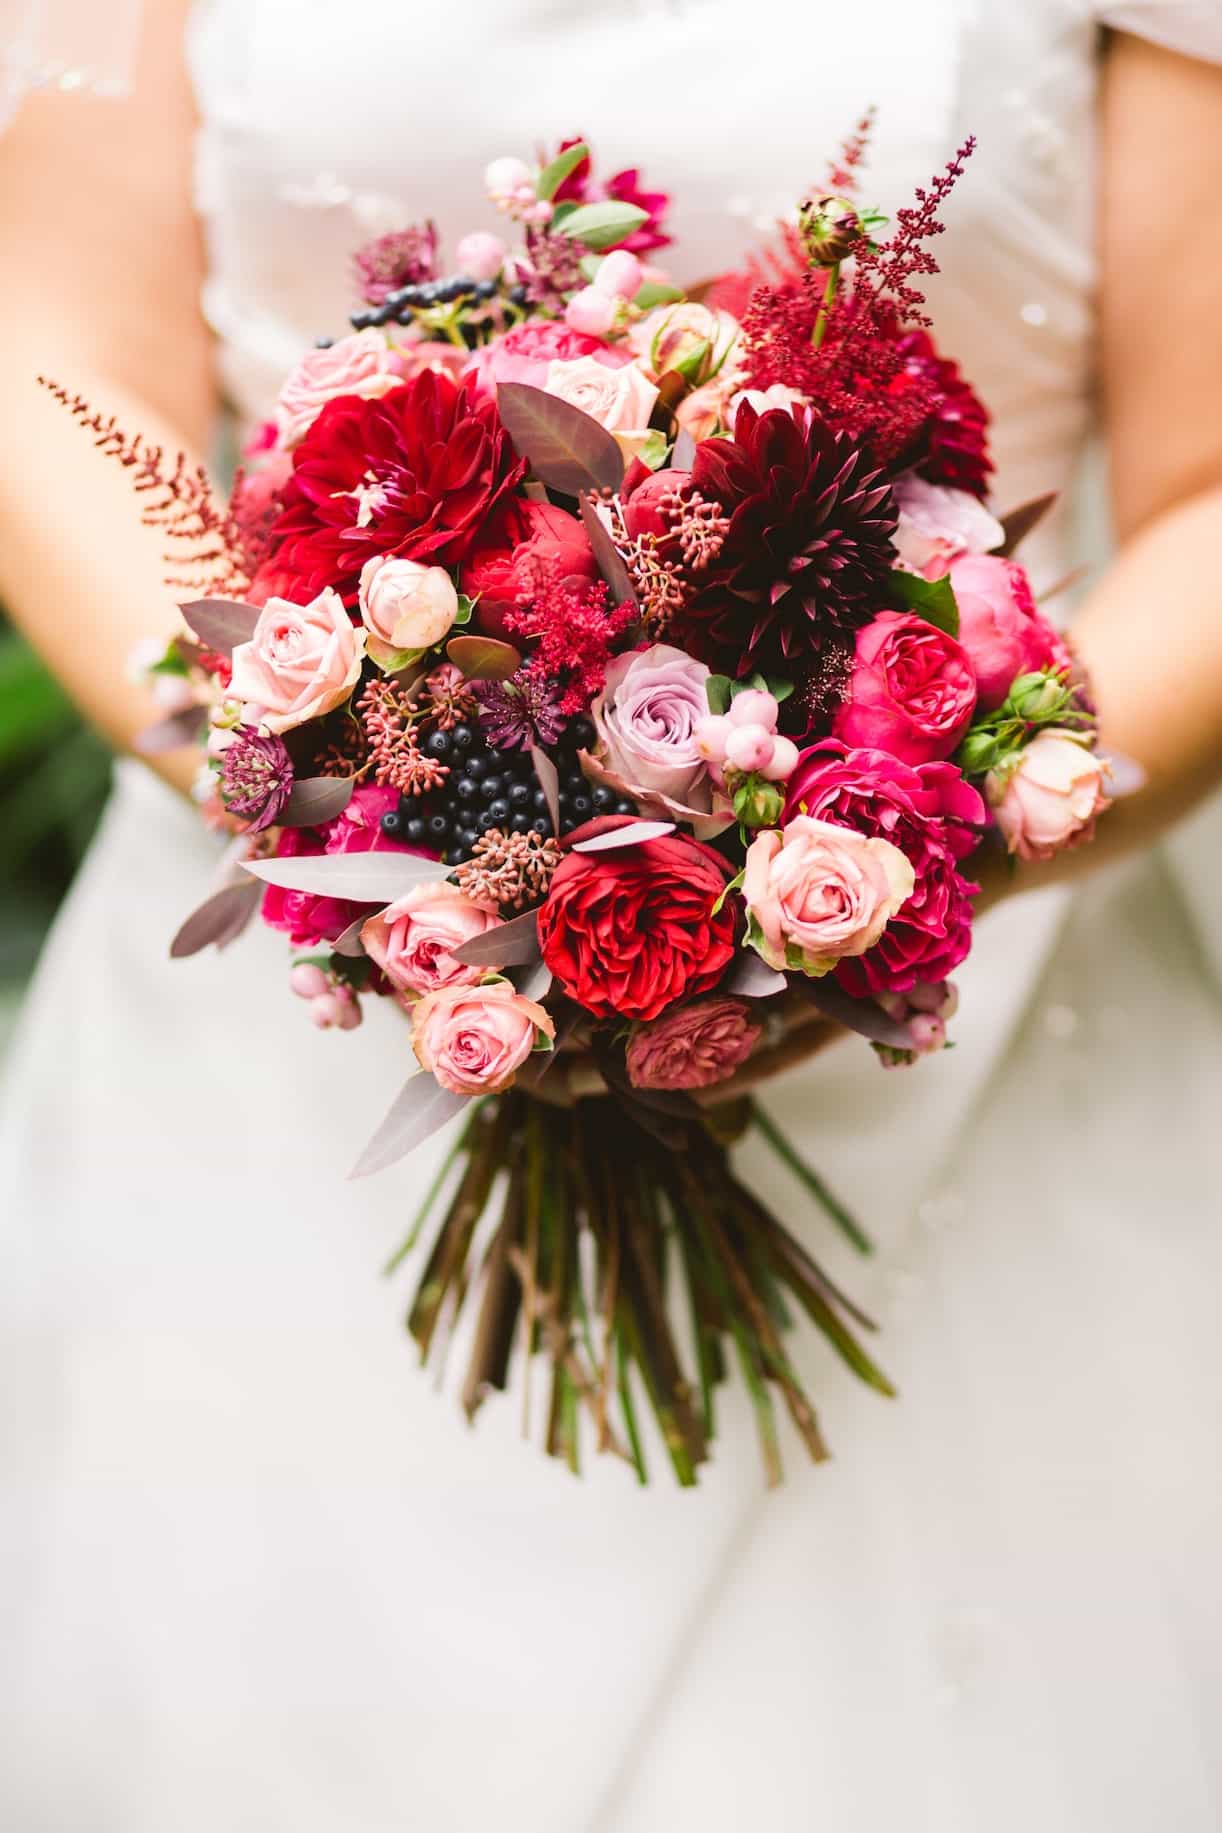 Monochromatic Red Wedding Bouquet for Winter